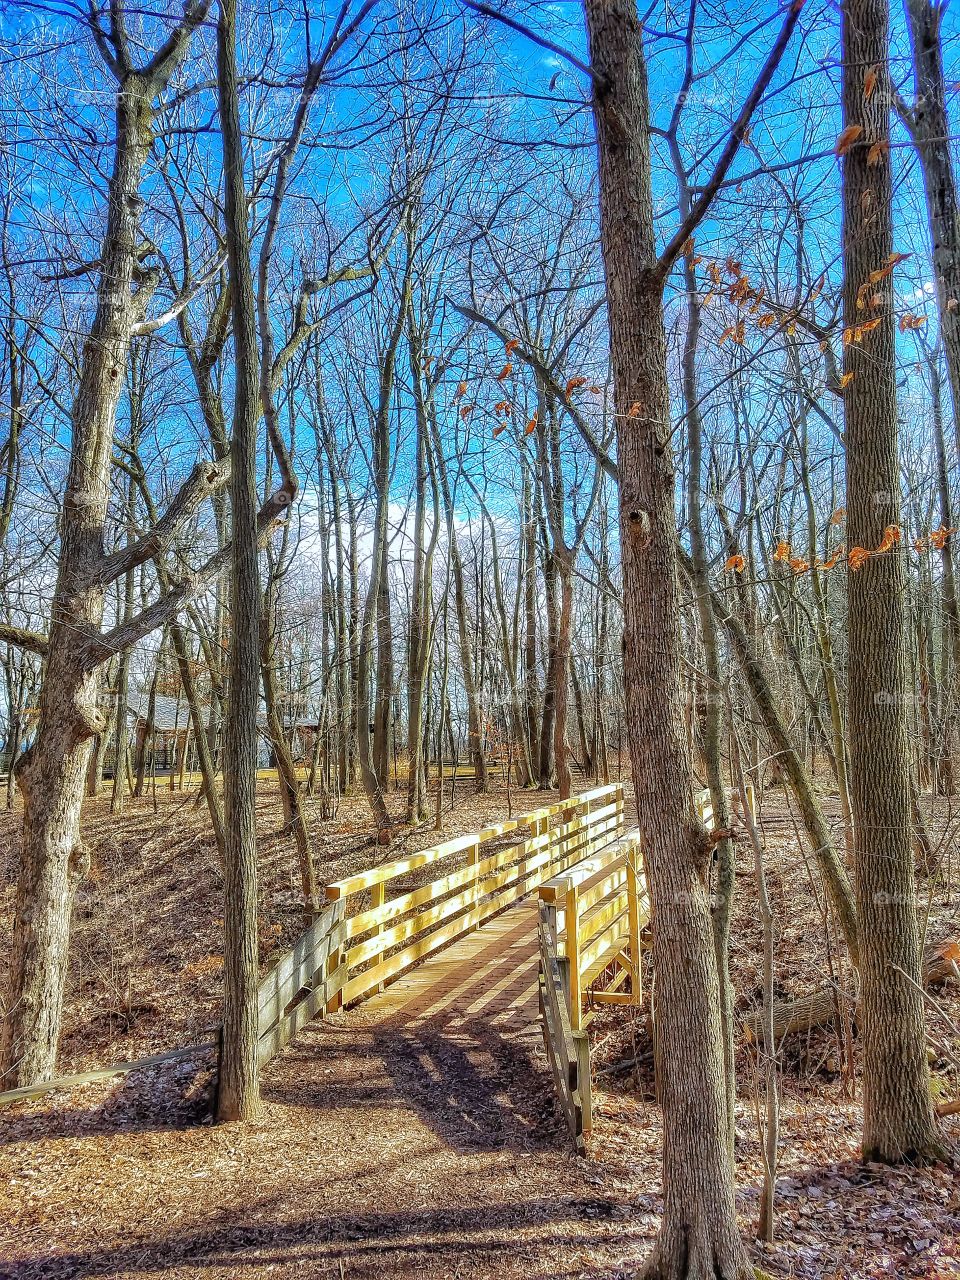 Bridge surrounded by bare trees